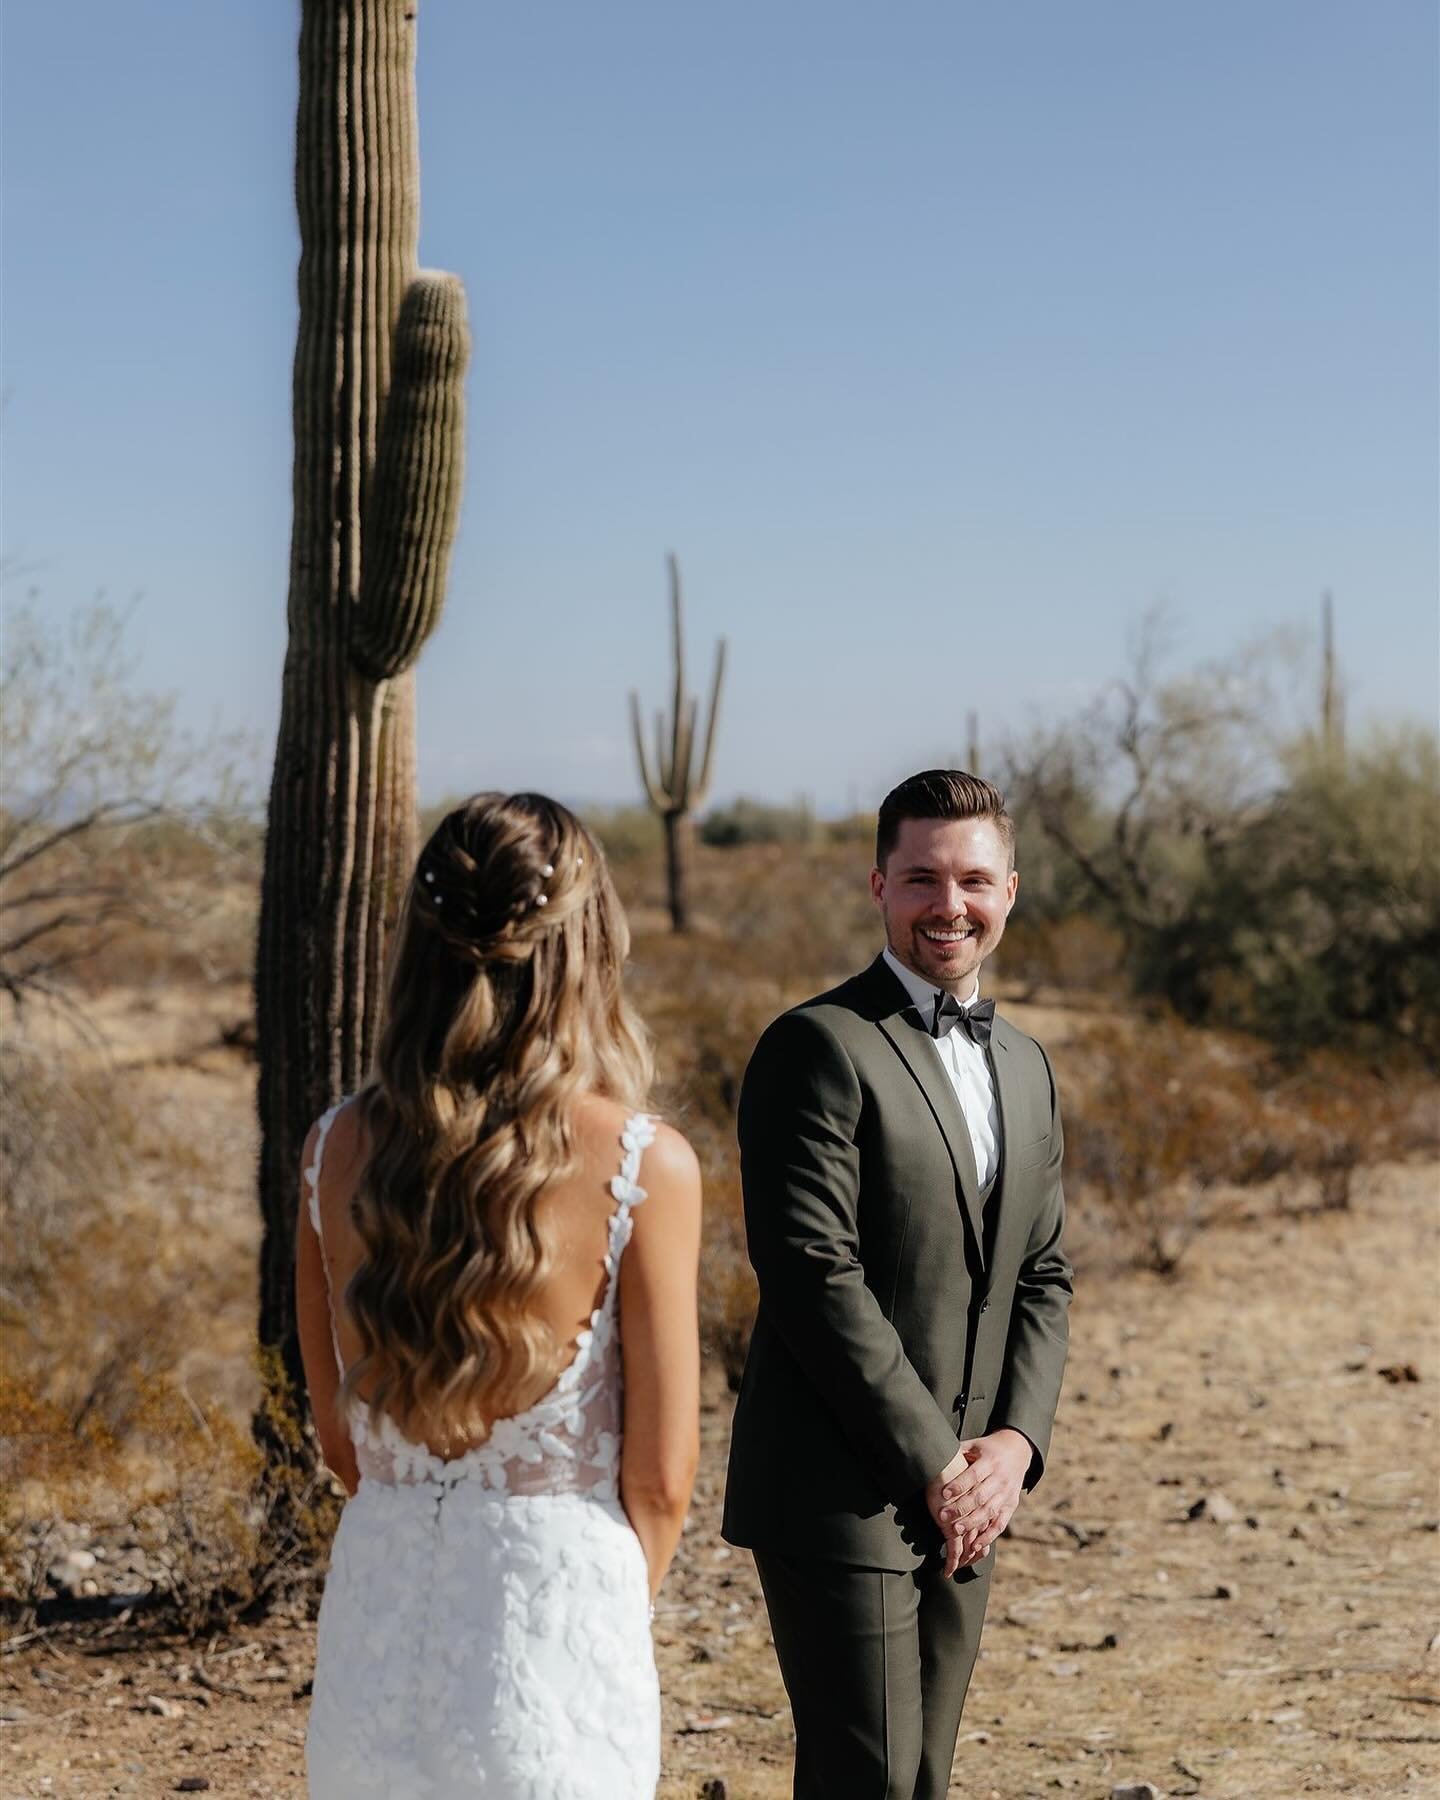 swipe to the left to get second hand butterflies from this first look -💞 

-
second shooting for @theshepardsphoto
&bull;
&bull;
&bull;
&bull;
&bull;
&bull;
&bull;
&bull;
#arizonaphotographer
#arizonaengagementphotographer
#arizonacouplesphotographe